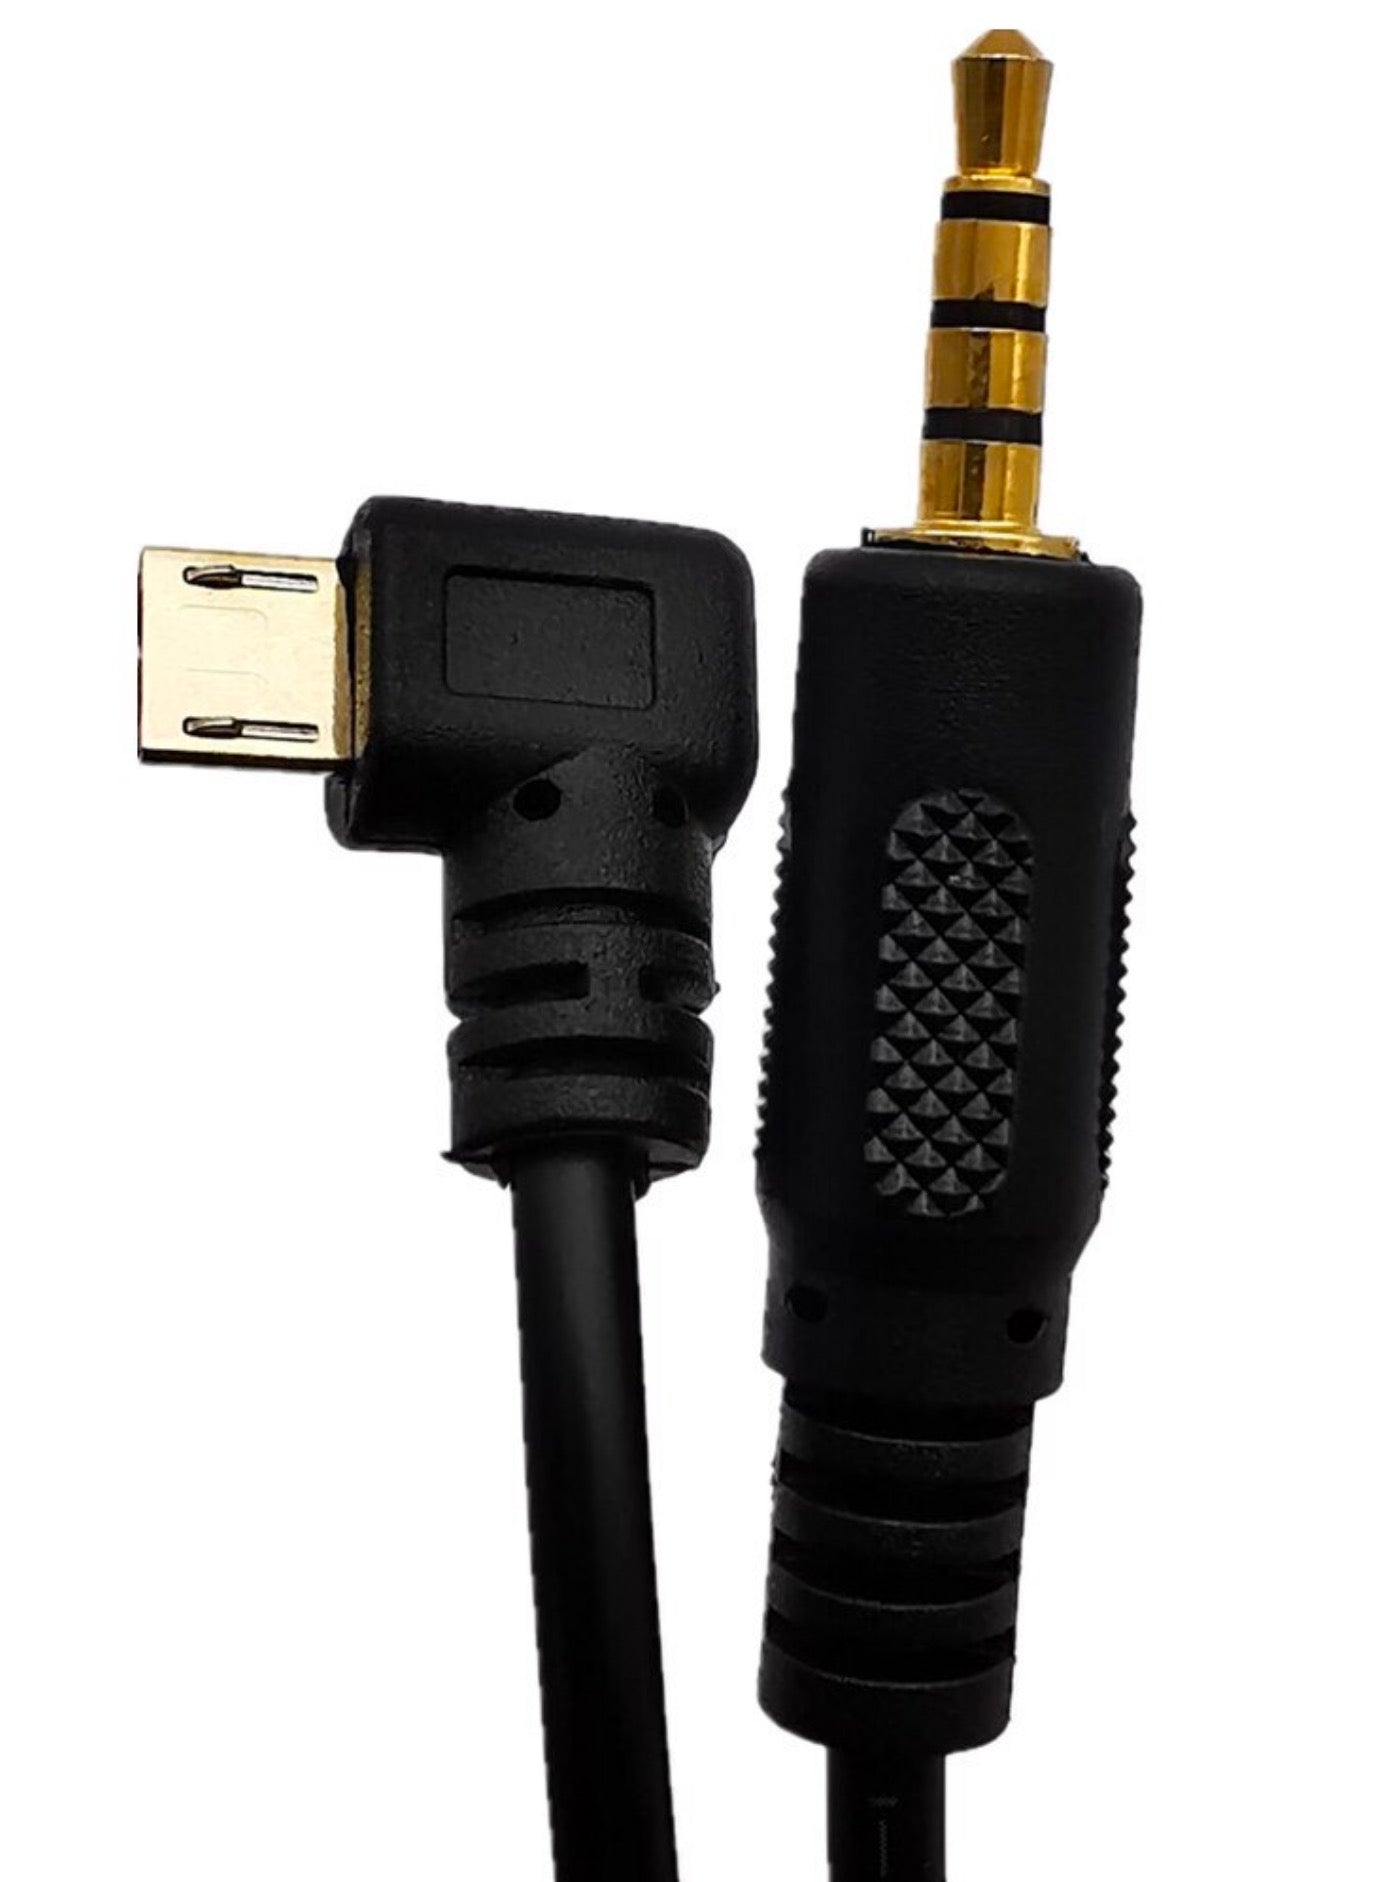 3.5mm Male 4 Pole to Micro USB Male Left Angle Audio Cable 1m